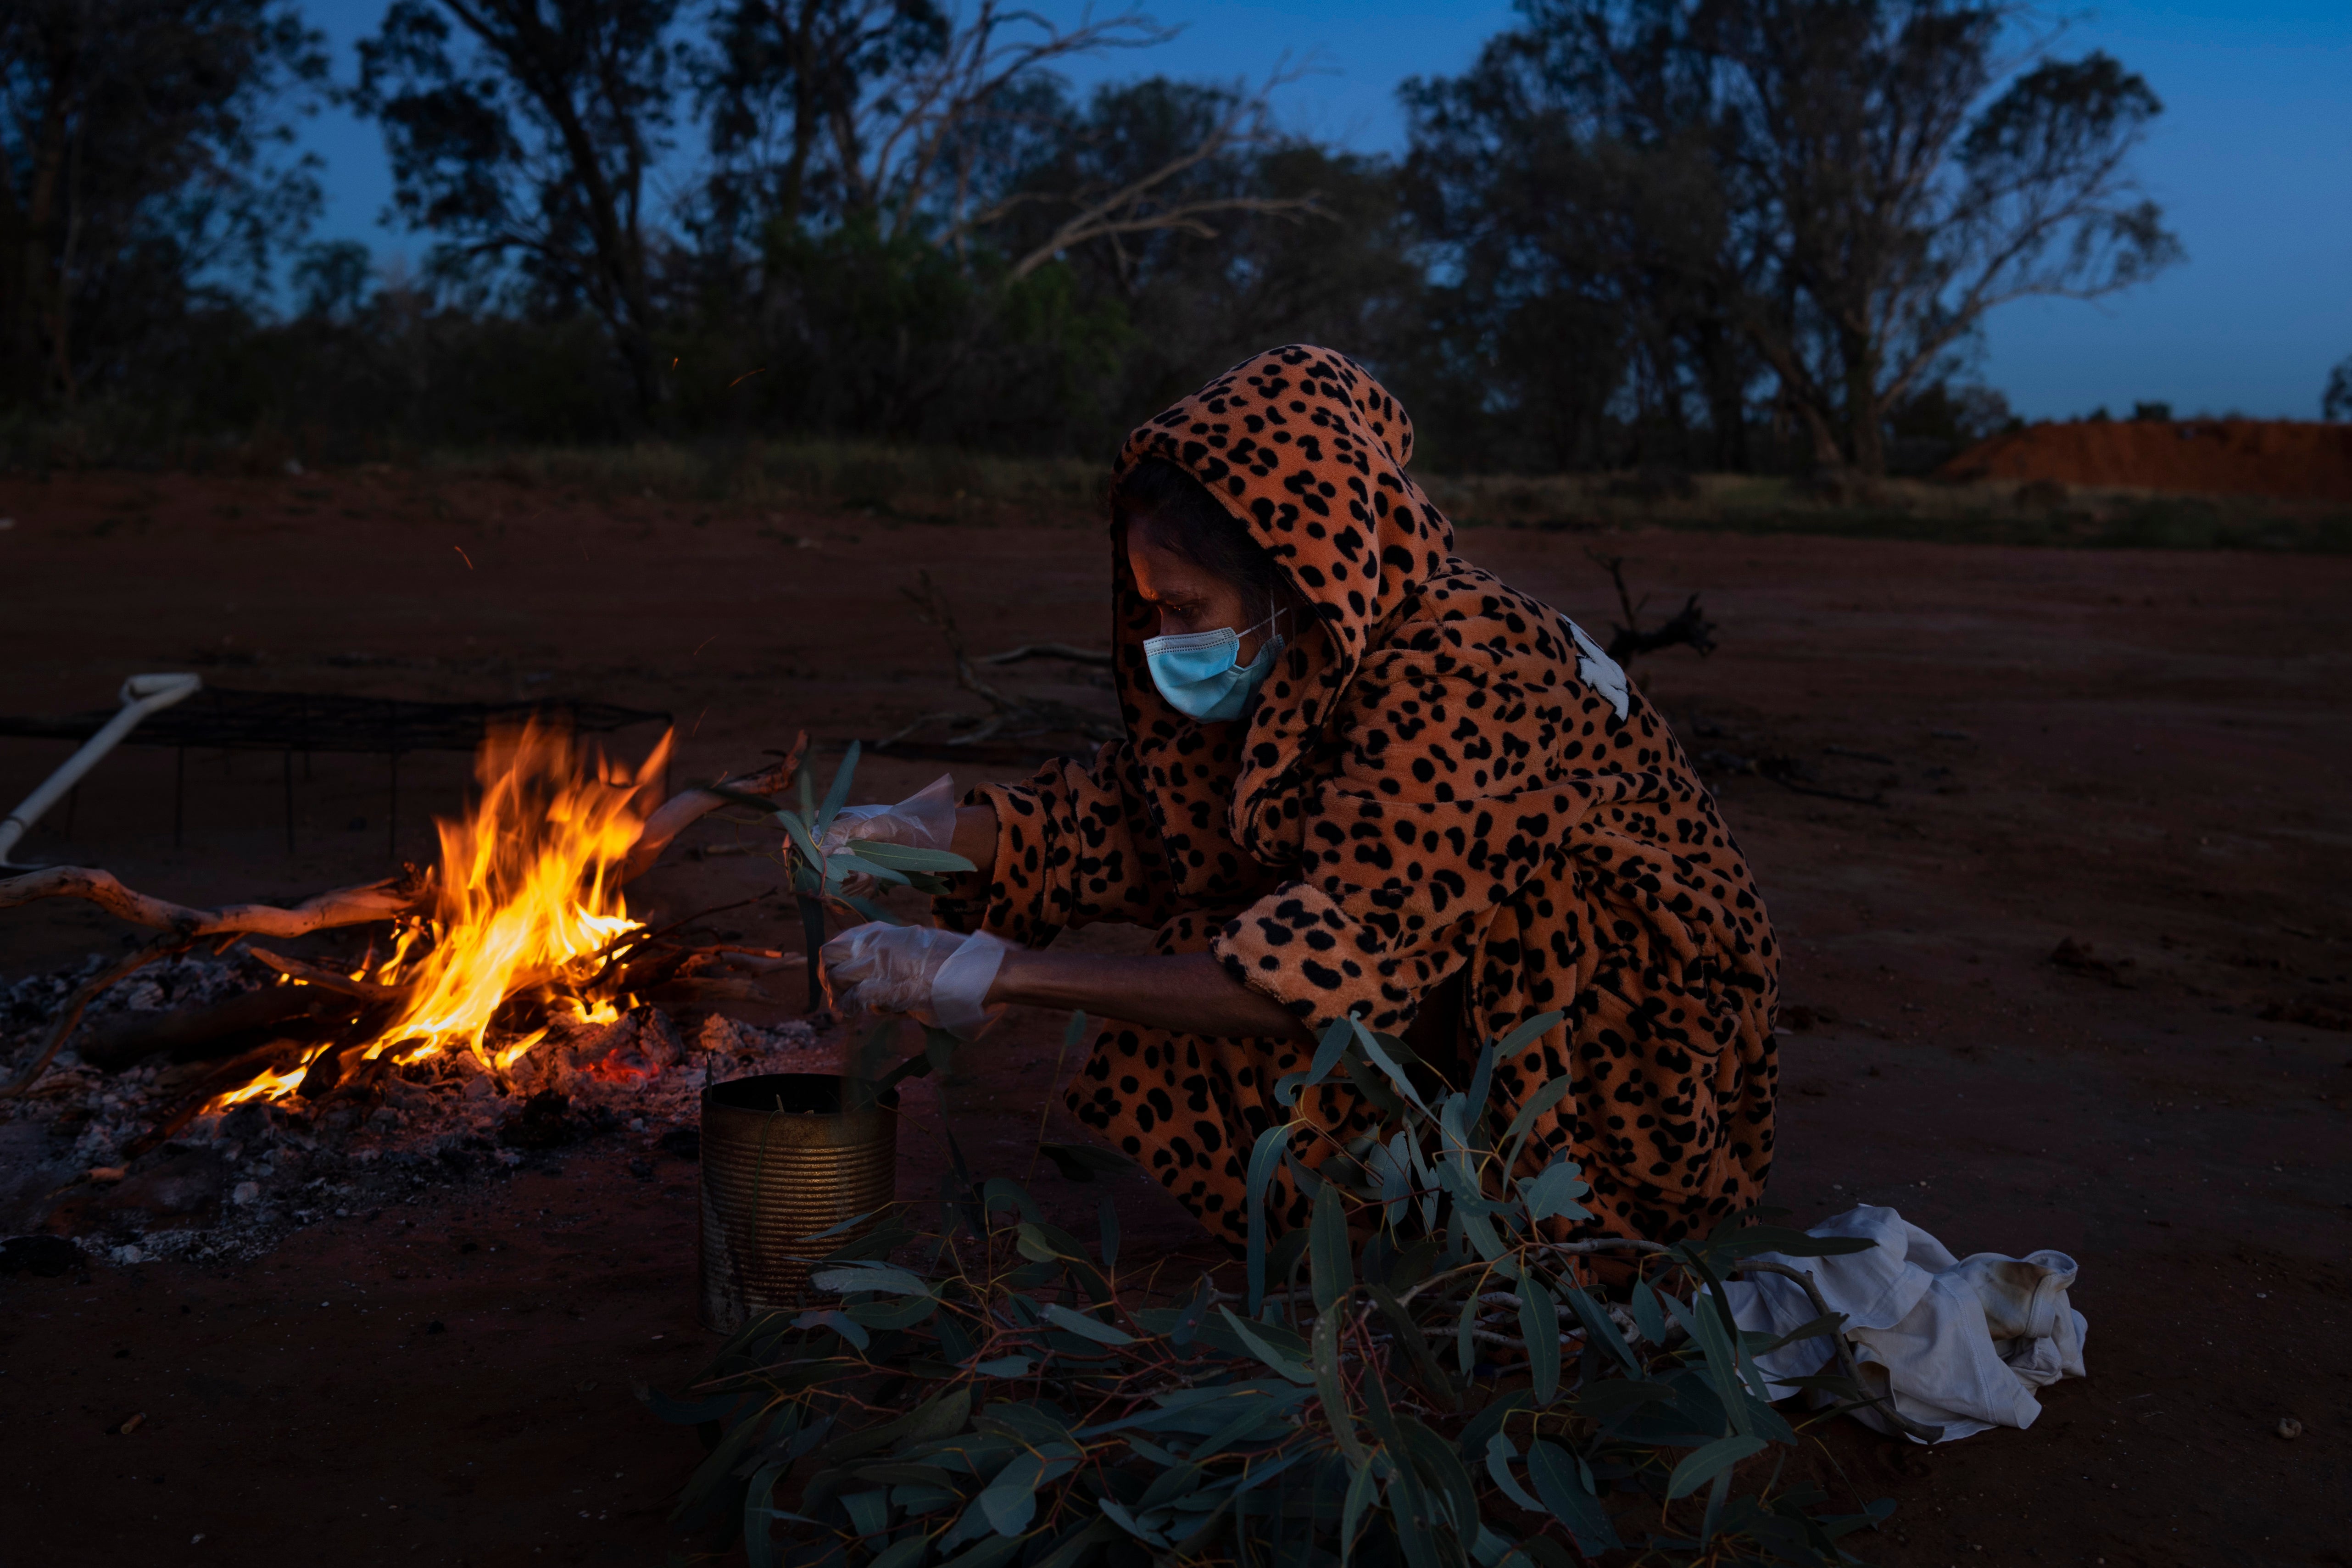 Patricia Wilson gathers eucalyptus leaves and other plants that she burned in a metal tin in an effort to ward off Covid-19 at the Warrawong campground in Wilcannia